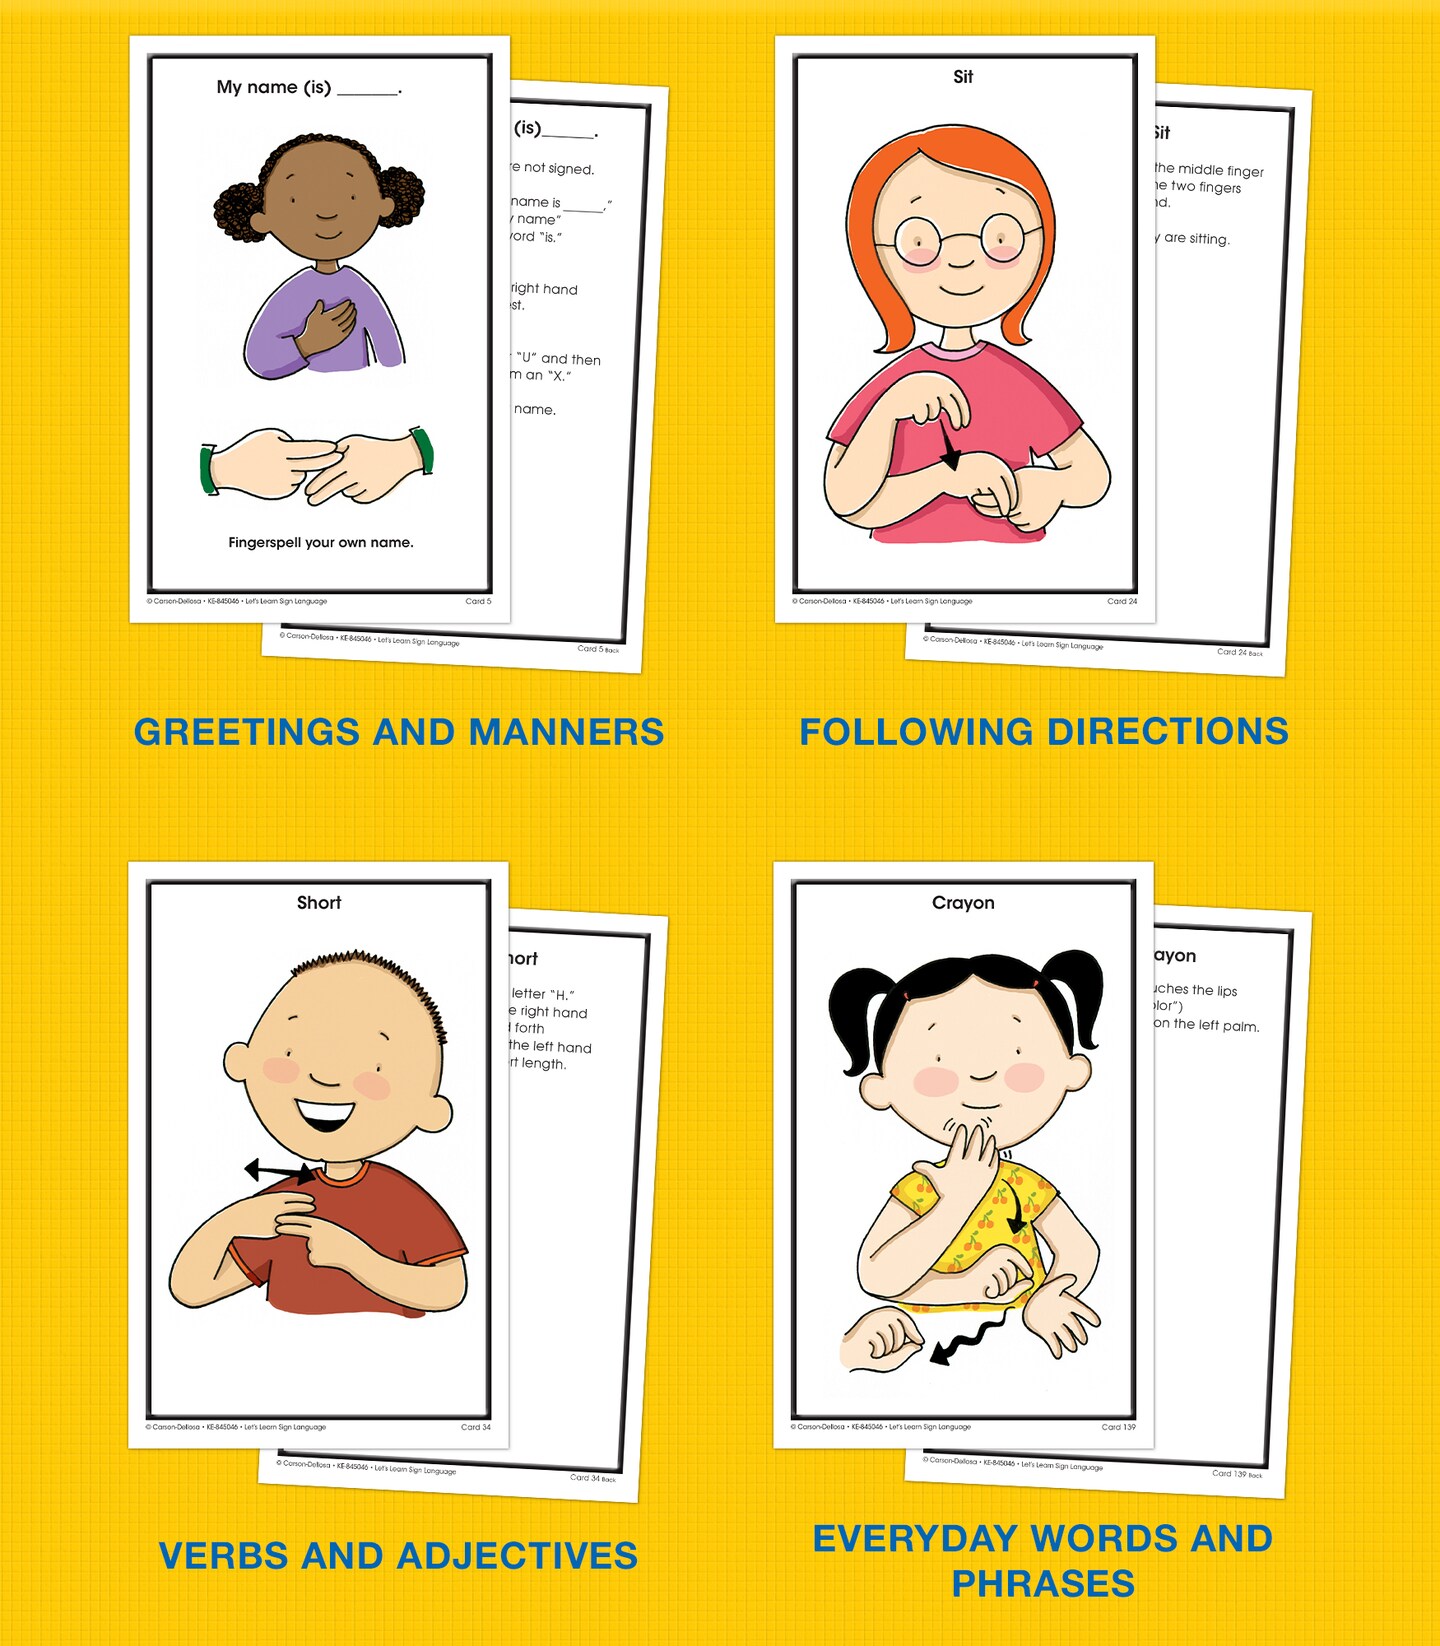 Key Education 160 American Sign Language Flash Cards for Kids, ASL Flash Cards for Kids PreK&#x2013;Grade 2, ASL Cards for Beginners Covering 160 Sight Words, Alphabet, Numbers, Emotions, and More ASL Signs